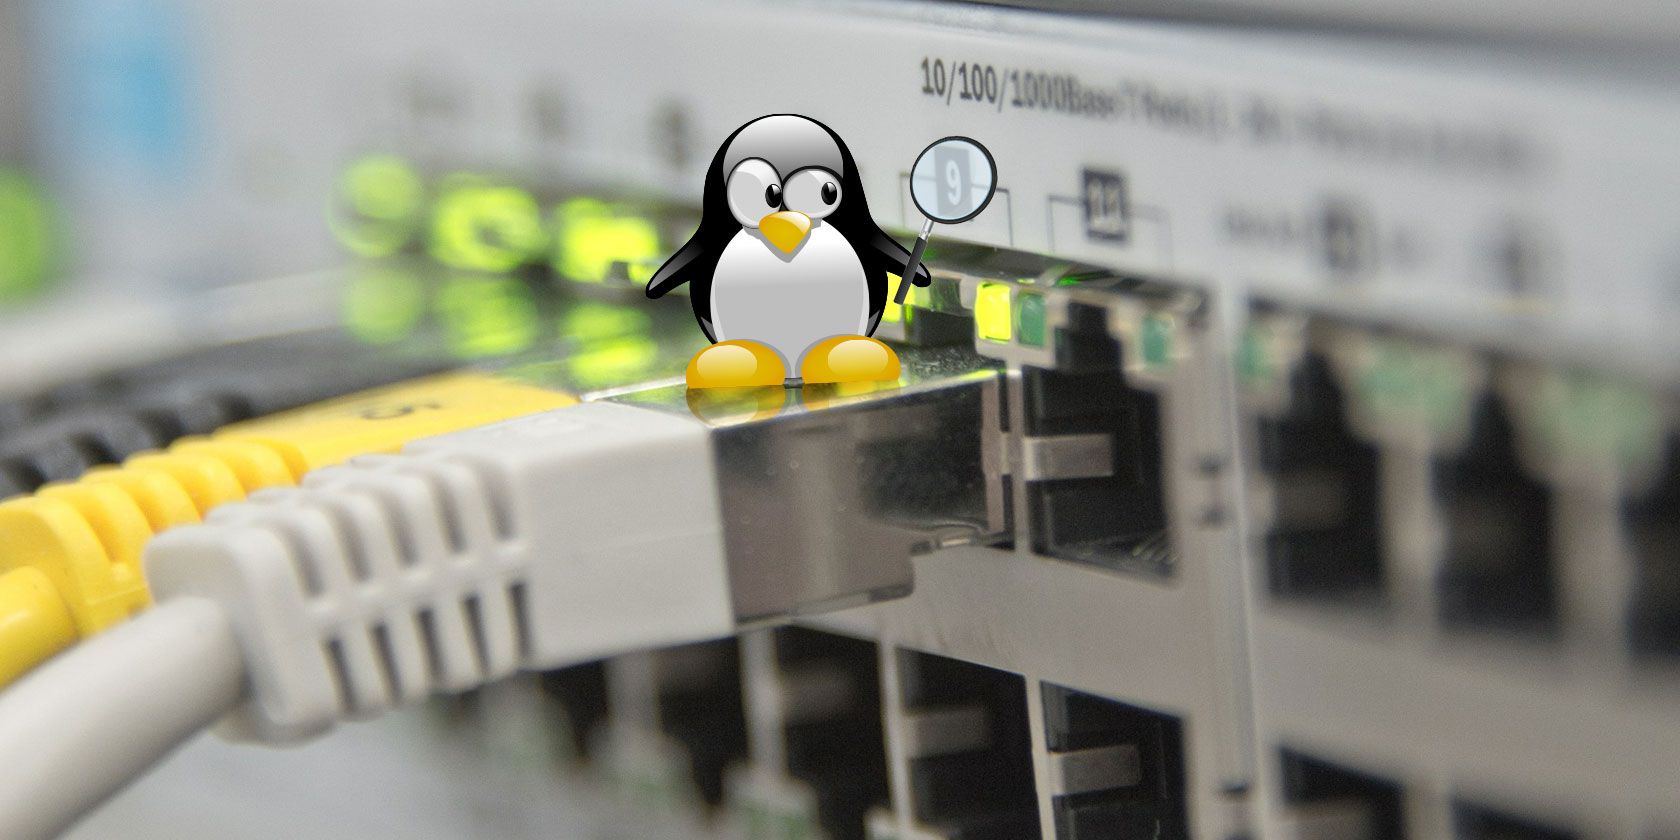 manage-ip-linux